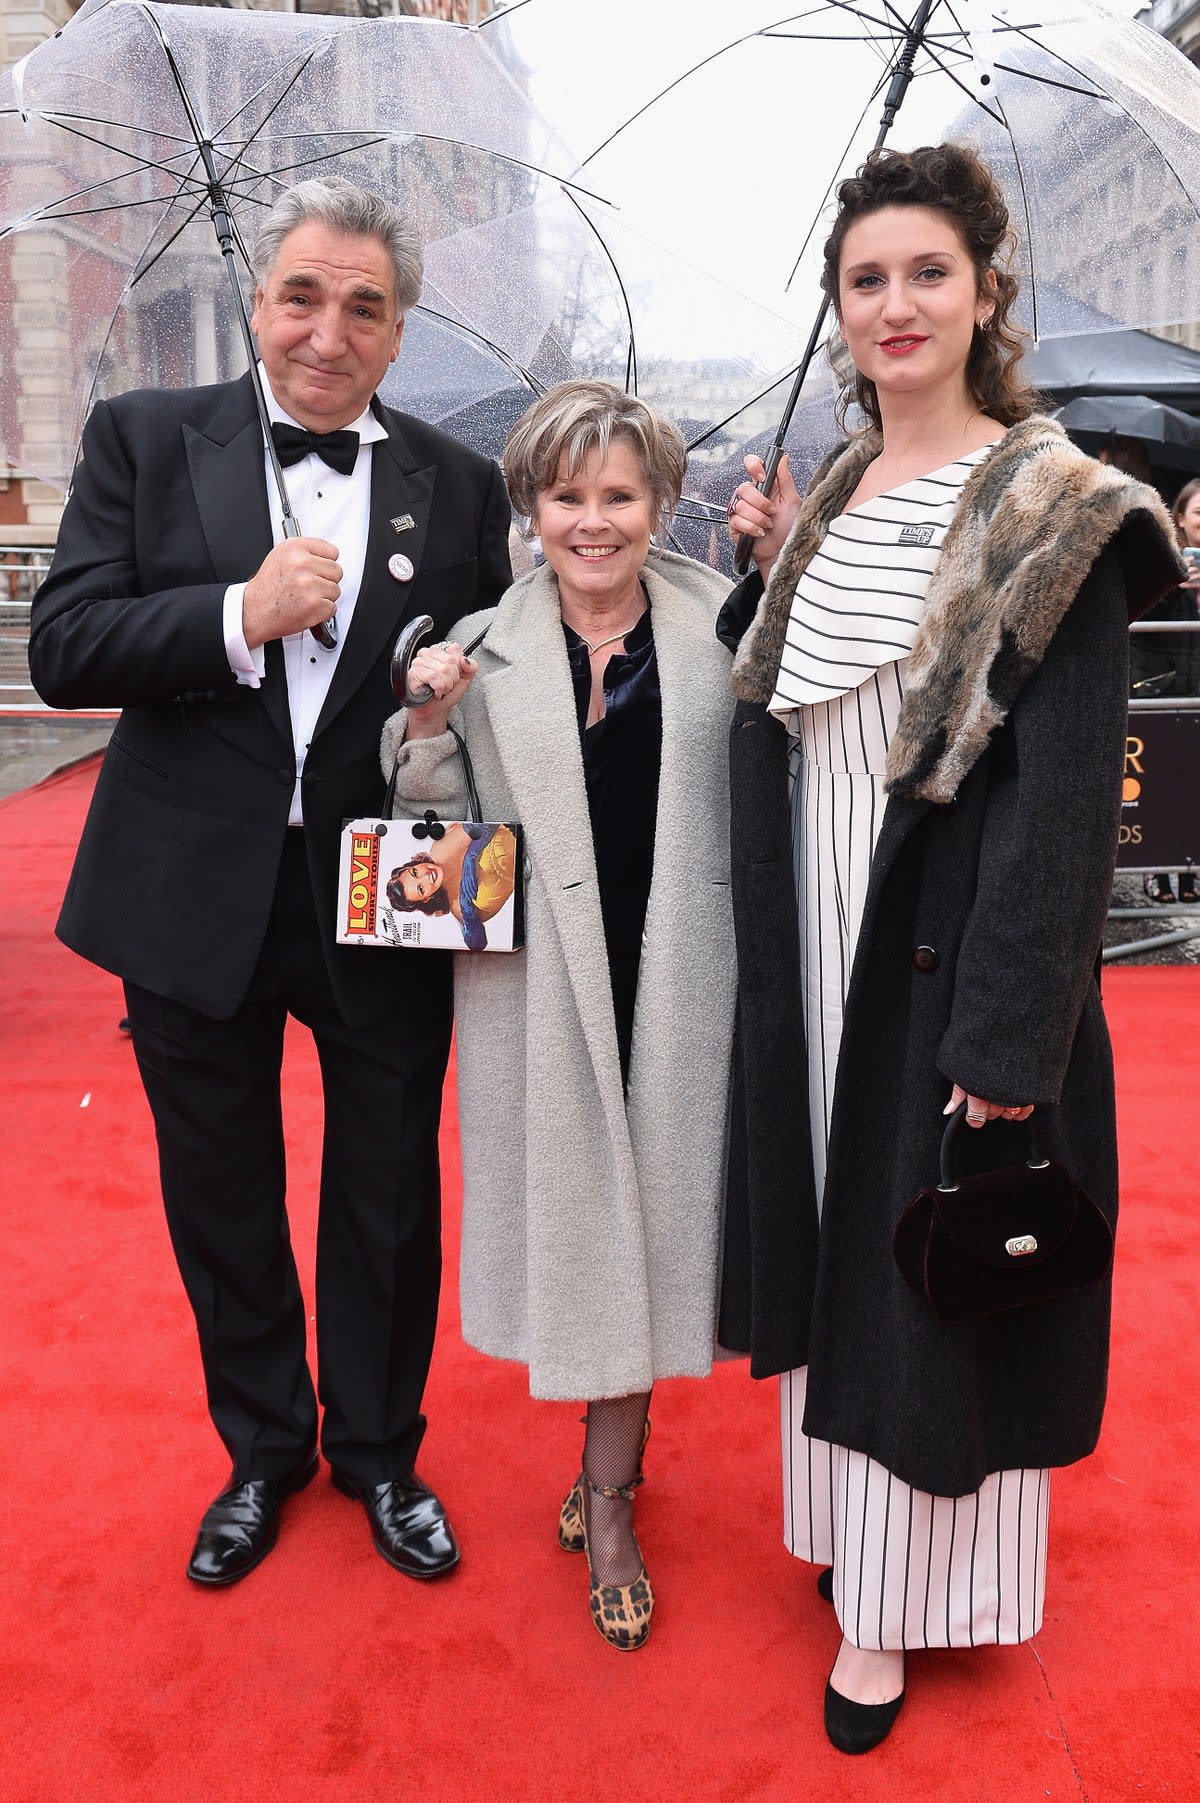 Jim Carter, Imelda Staunton and Bessie Carter attend The Olivier Awards with Mastercard at Royal Albert Hall on April 8, 2018 (Getty Images)